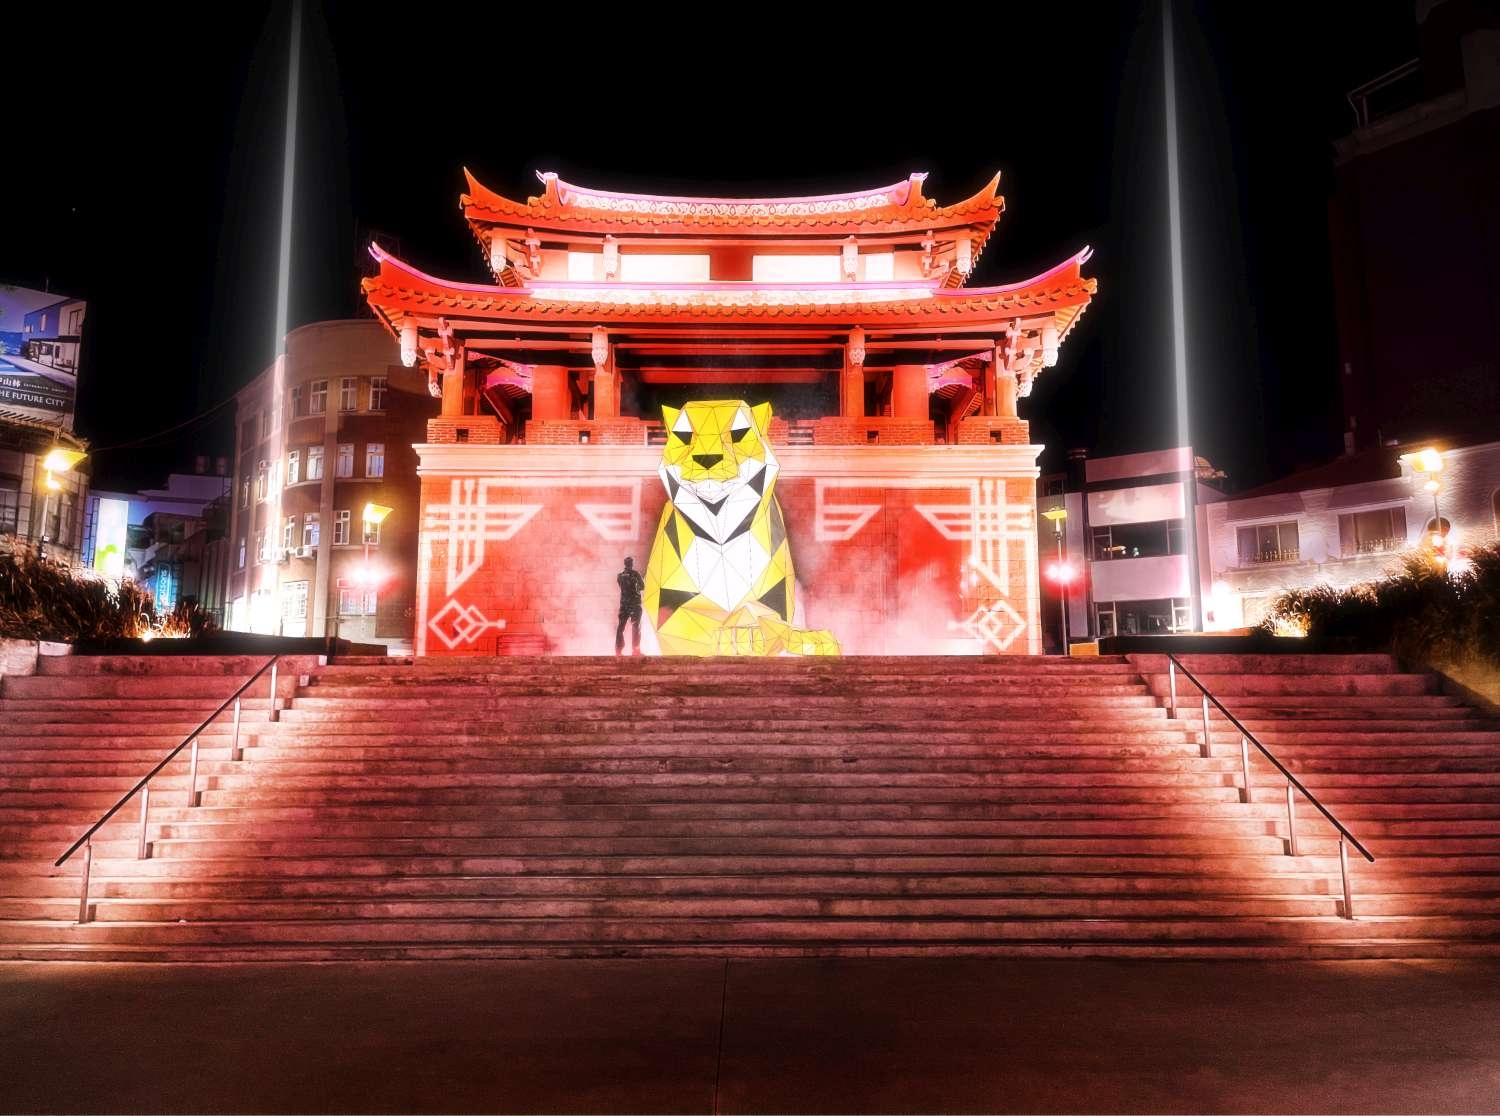 The new landmark "Light Tiger" in Hsinchu City will light up the East Gate City from January 21. (Photo / Provided by Hsinchu City Government)